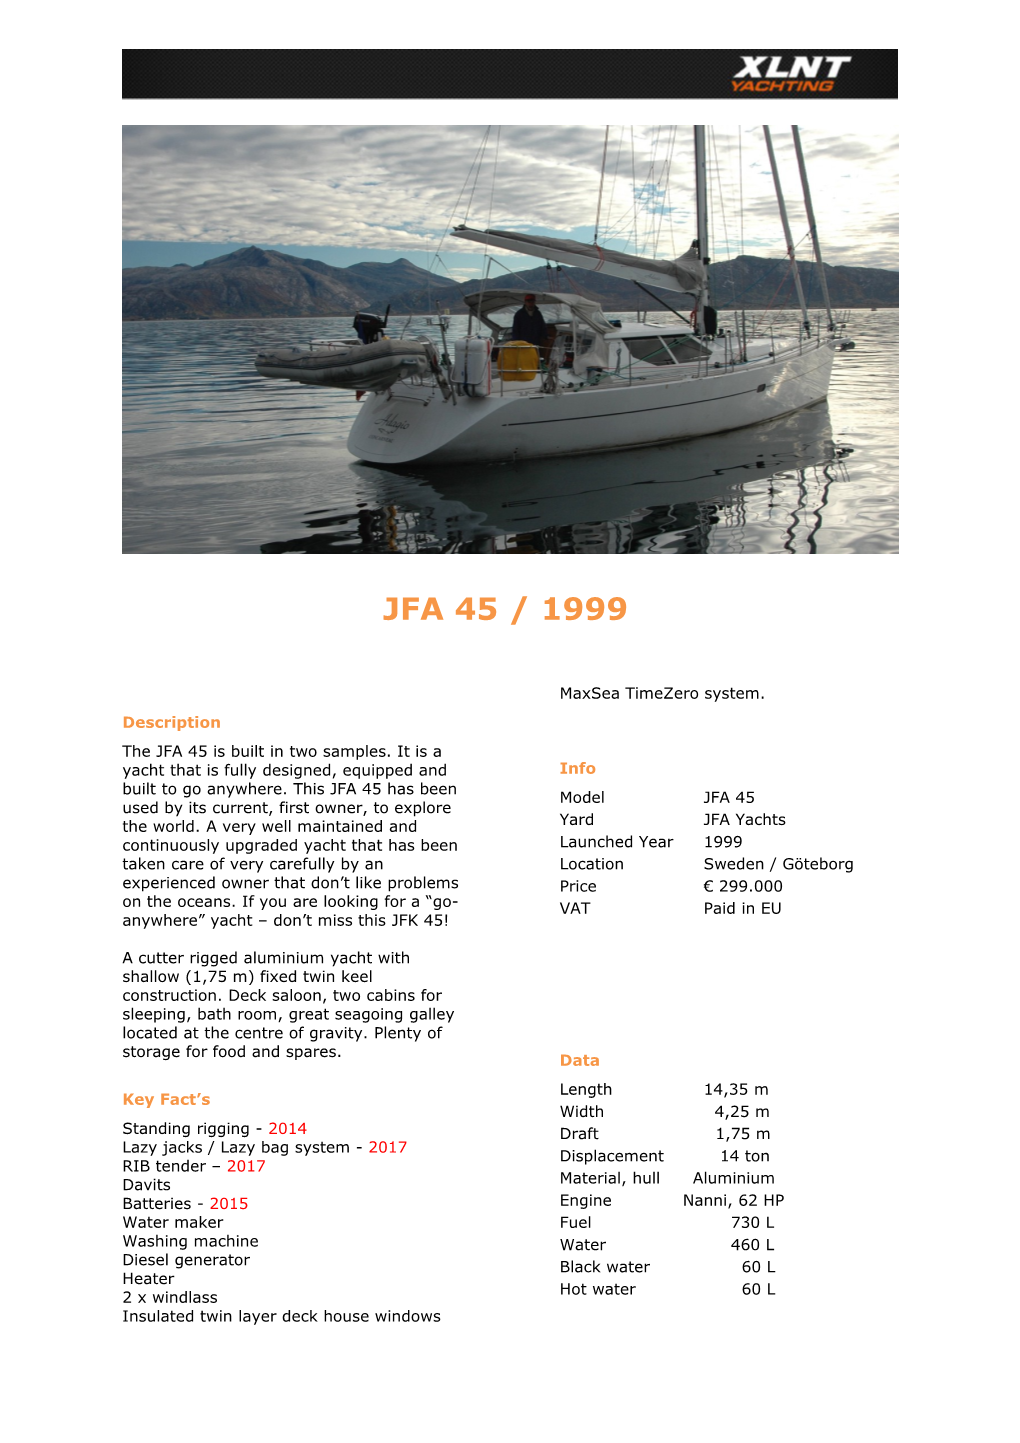 The JFA 45 Is Built in Two Samples. It Is a Yacht That Is Fully Designed, Equipped And